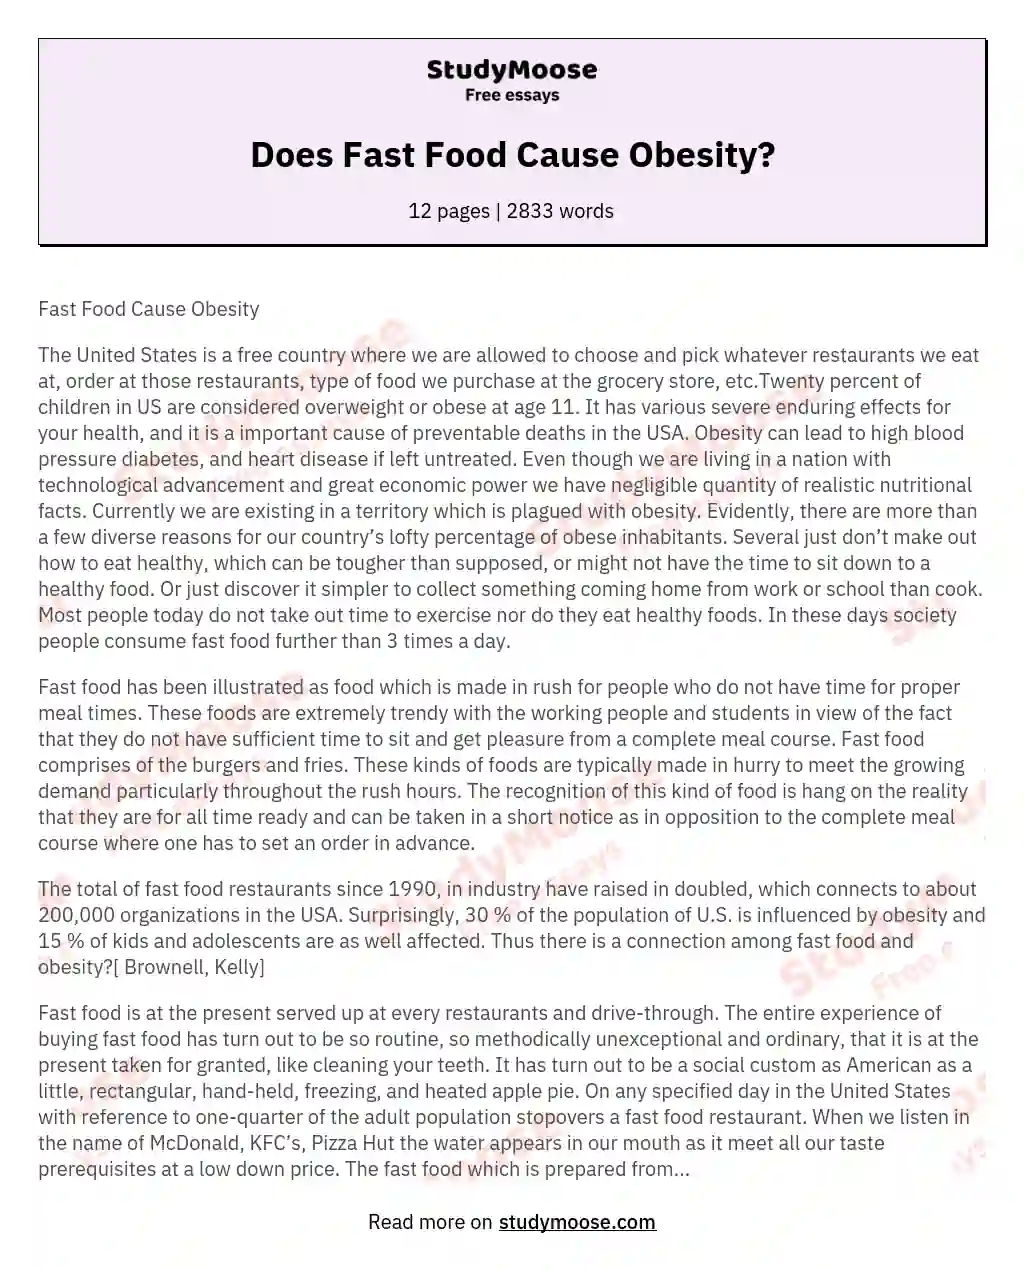 Does Fast Food Cause Obesity? essay